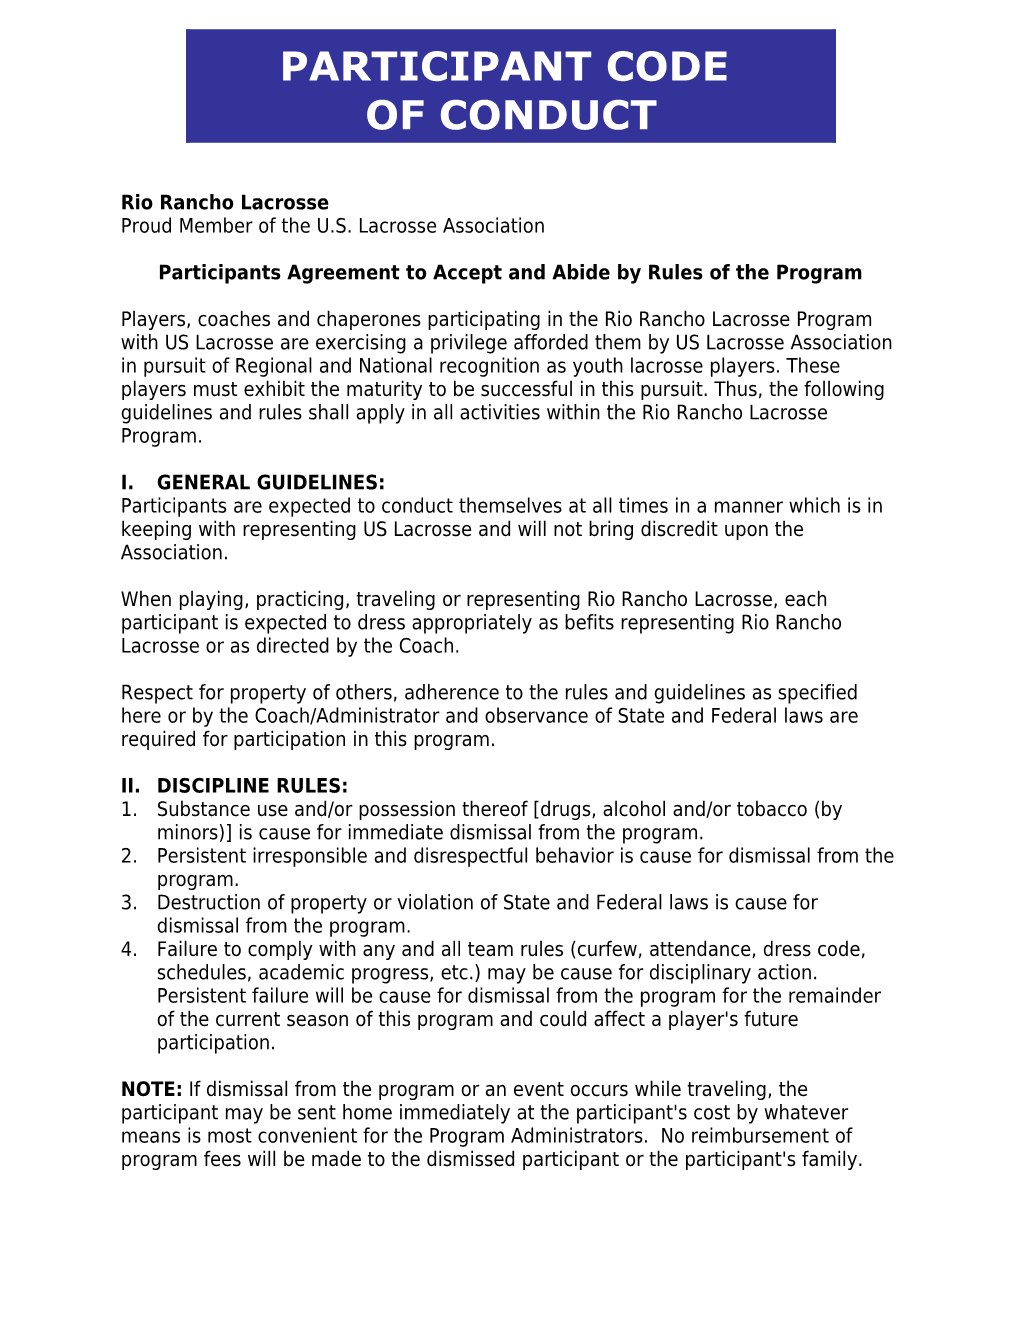 Participants Agreement to Accept and Abide by Rules of the Program